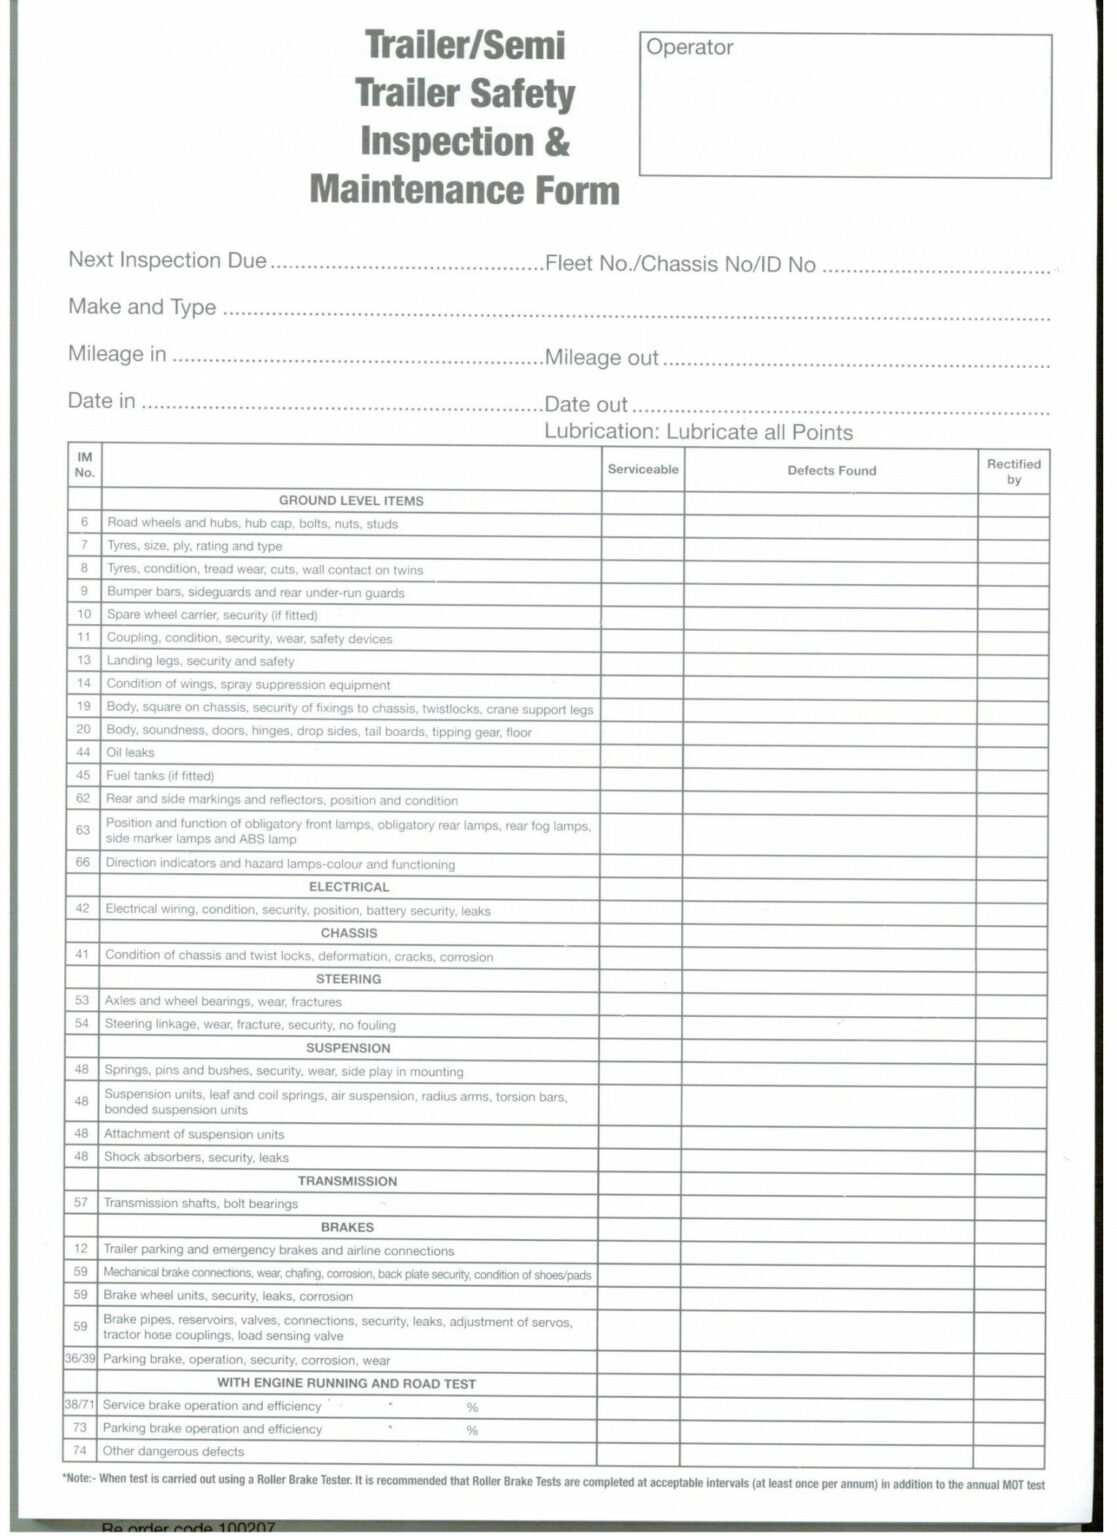 printable-trailer-and-semi-trailers-inspection-and-rectification-report-vehicle-safety